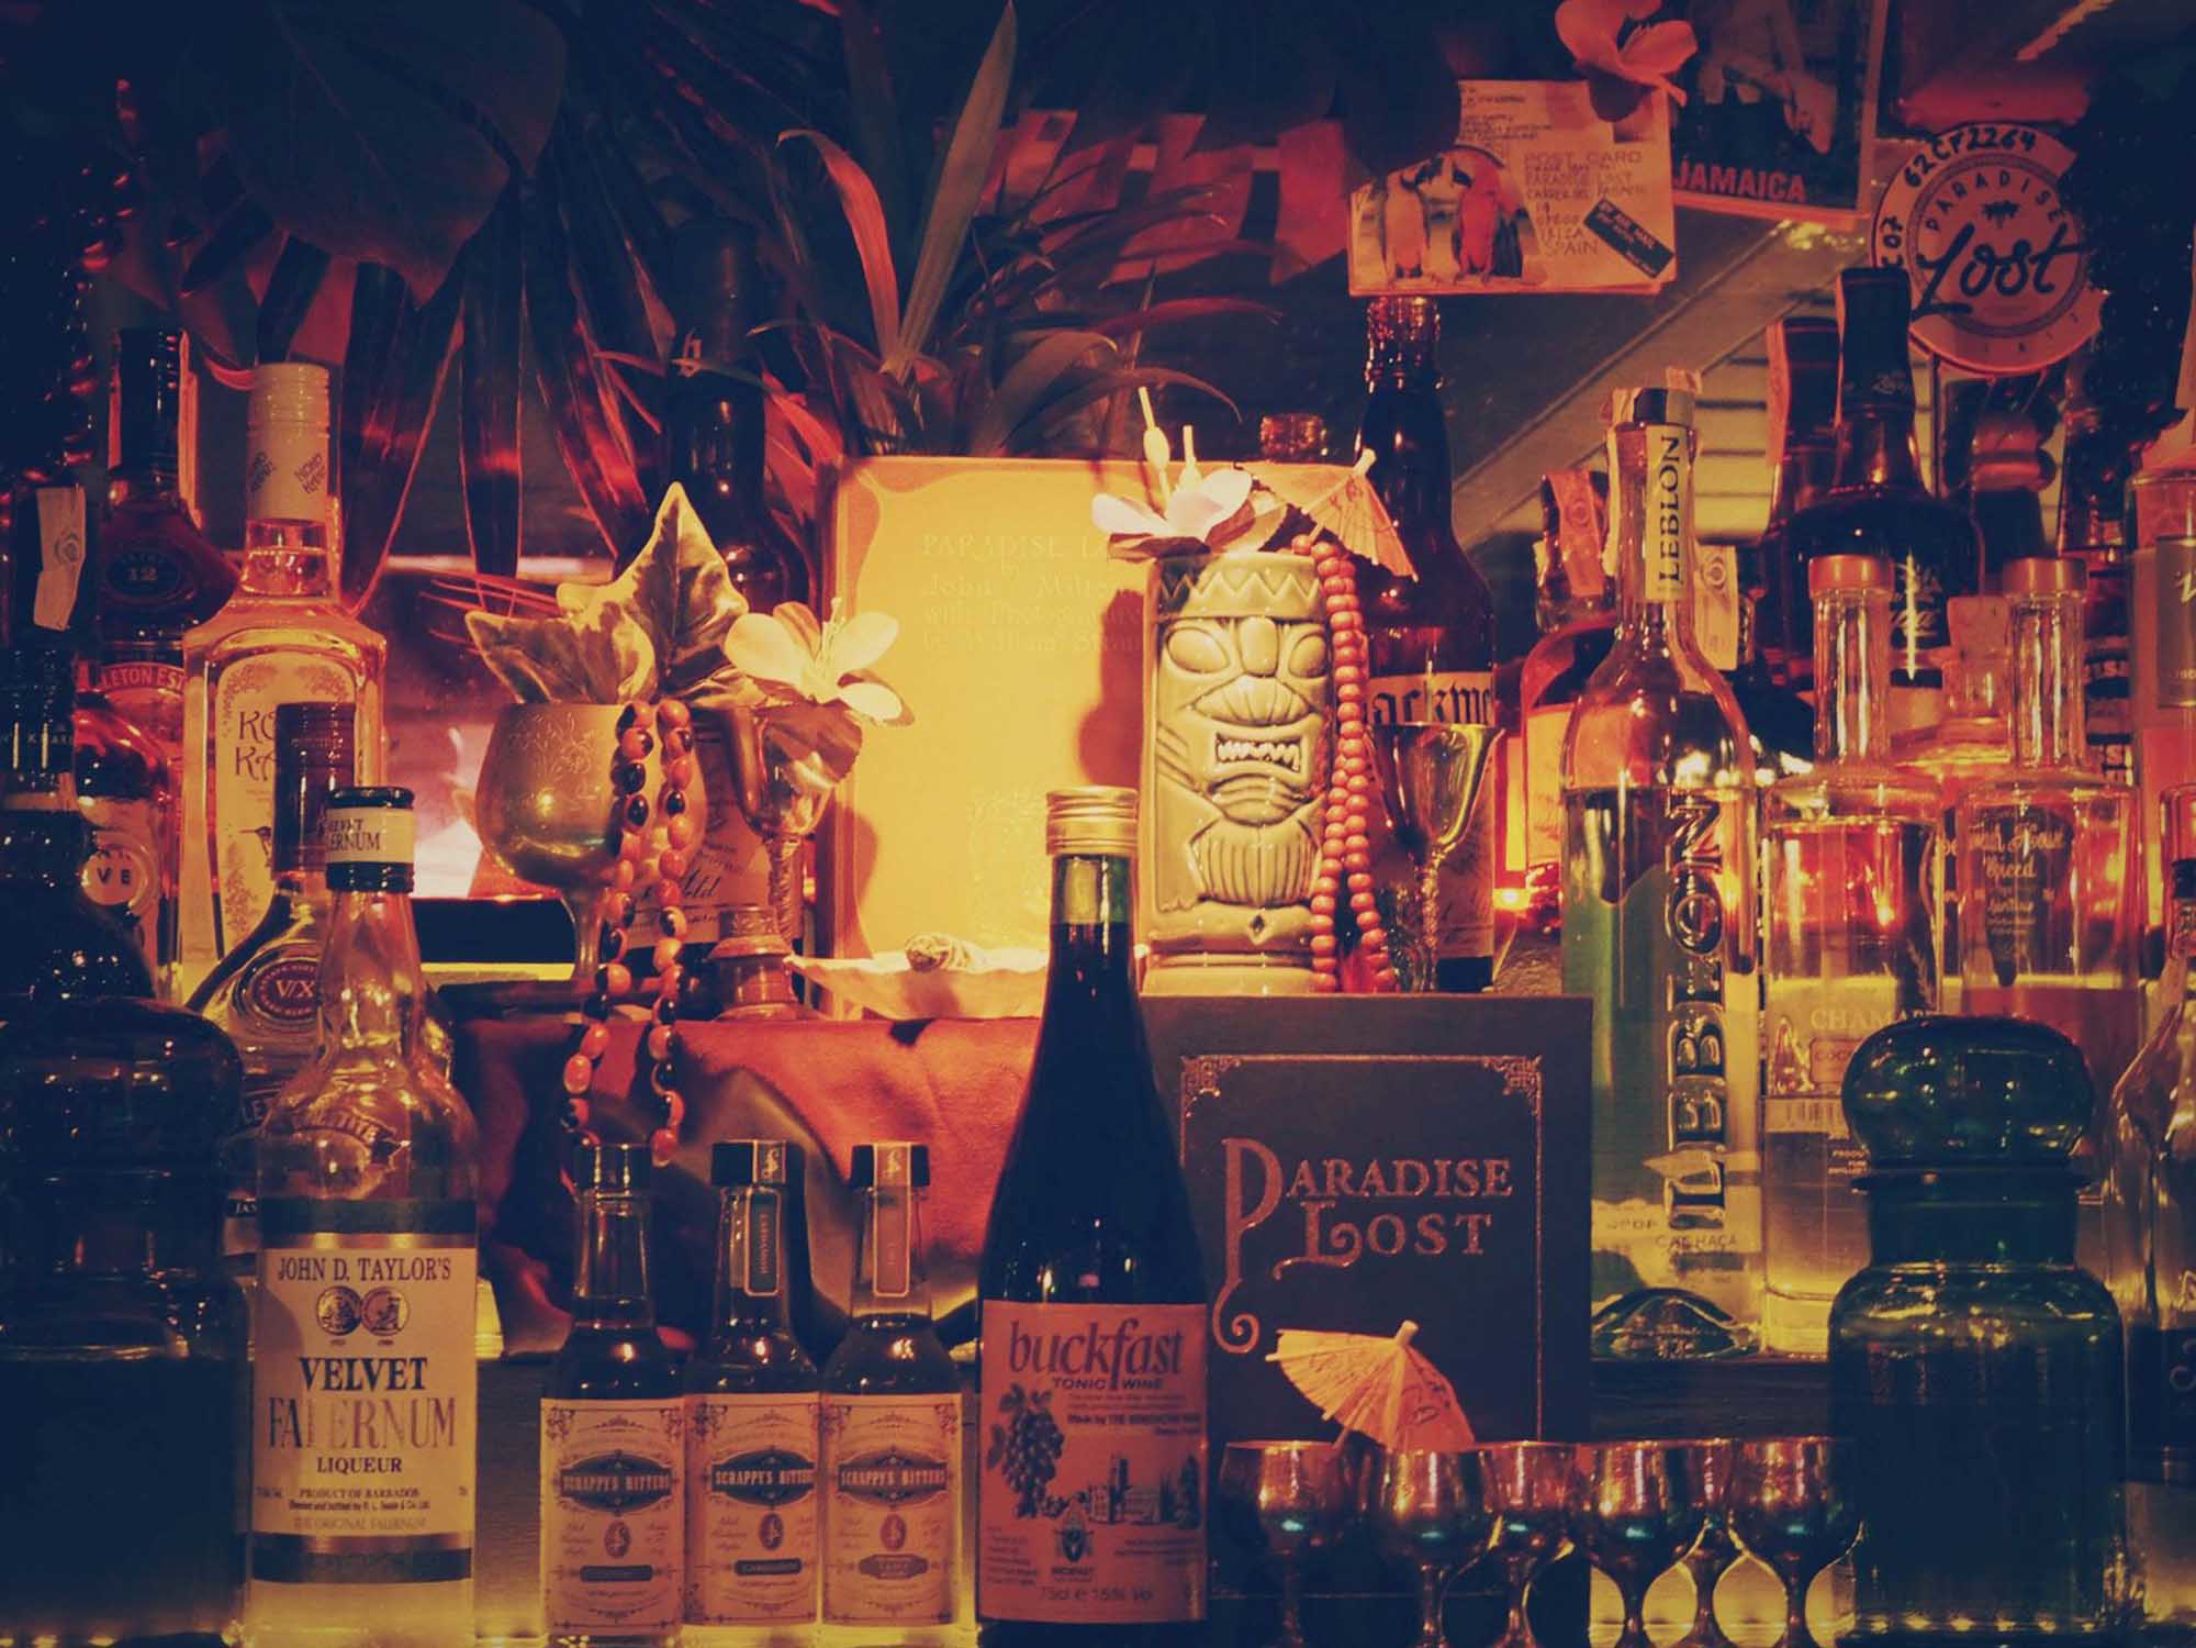 Best Bars in Ibiza - Paradise Lost